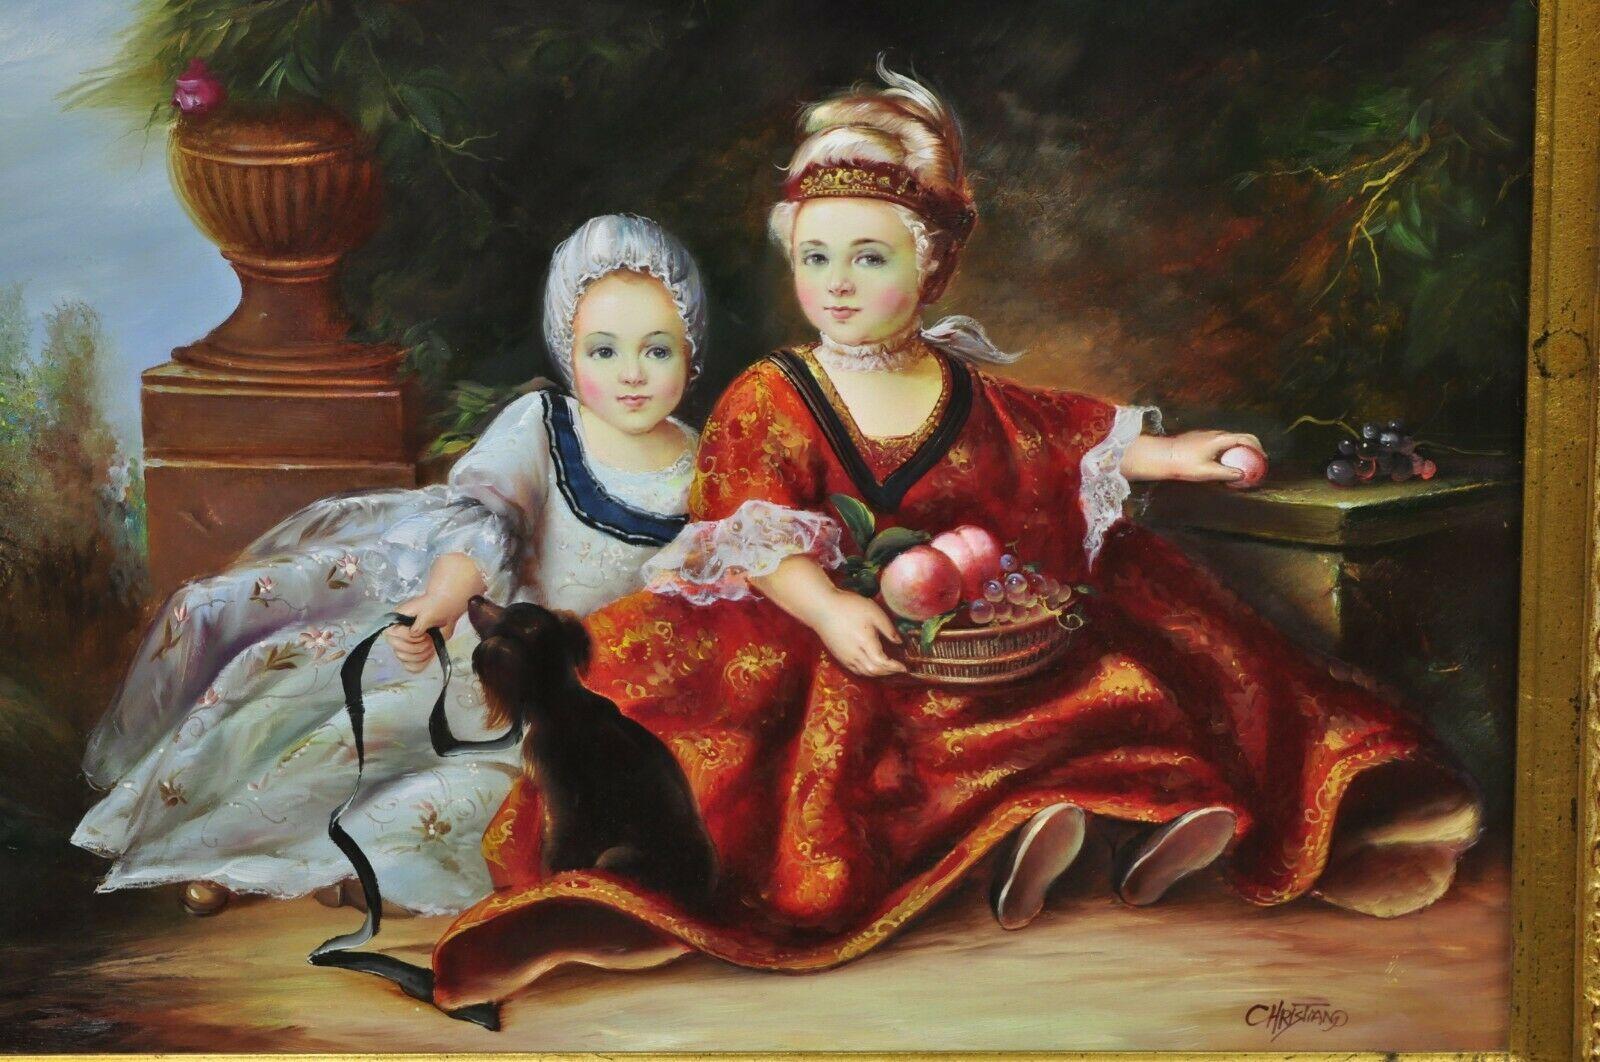 French style oil on board painting of 2 small young girls with dog Signed Christiano. Item features ornate gold gilt wood frame, painting on board of two young girls, with blue and red dress with fruit and dog. Signed 